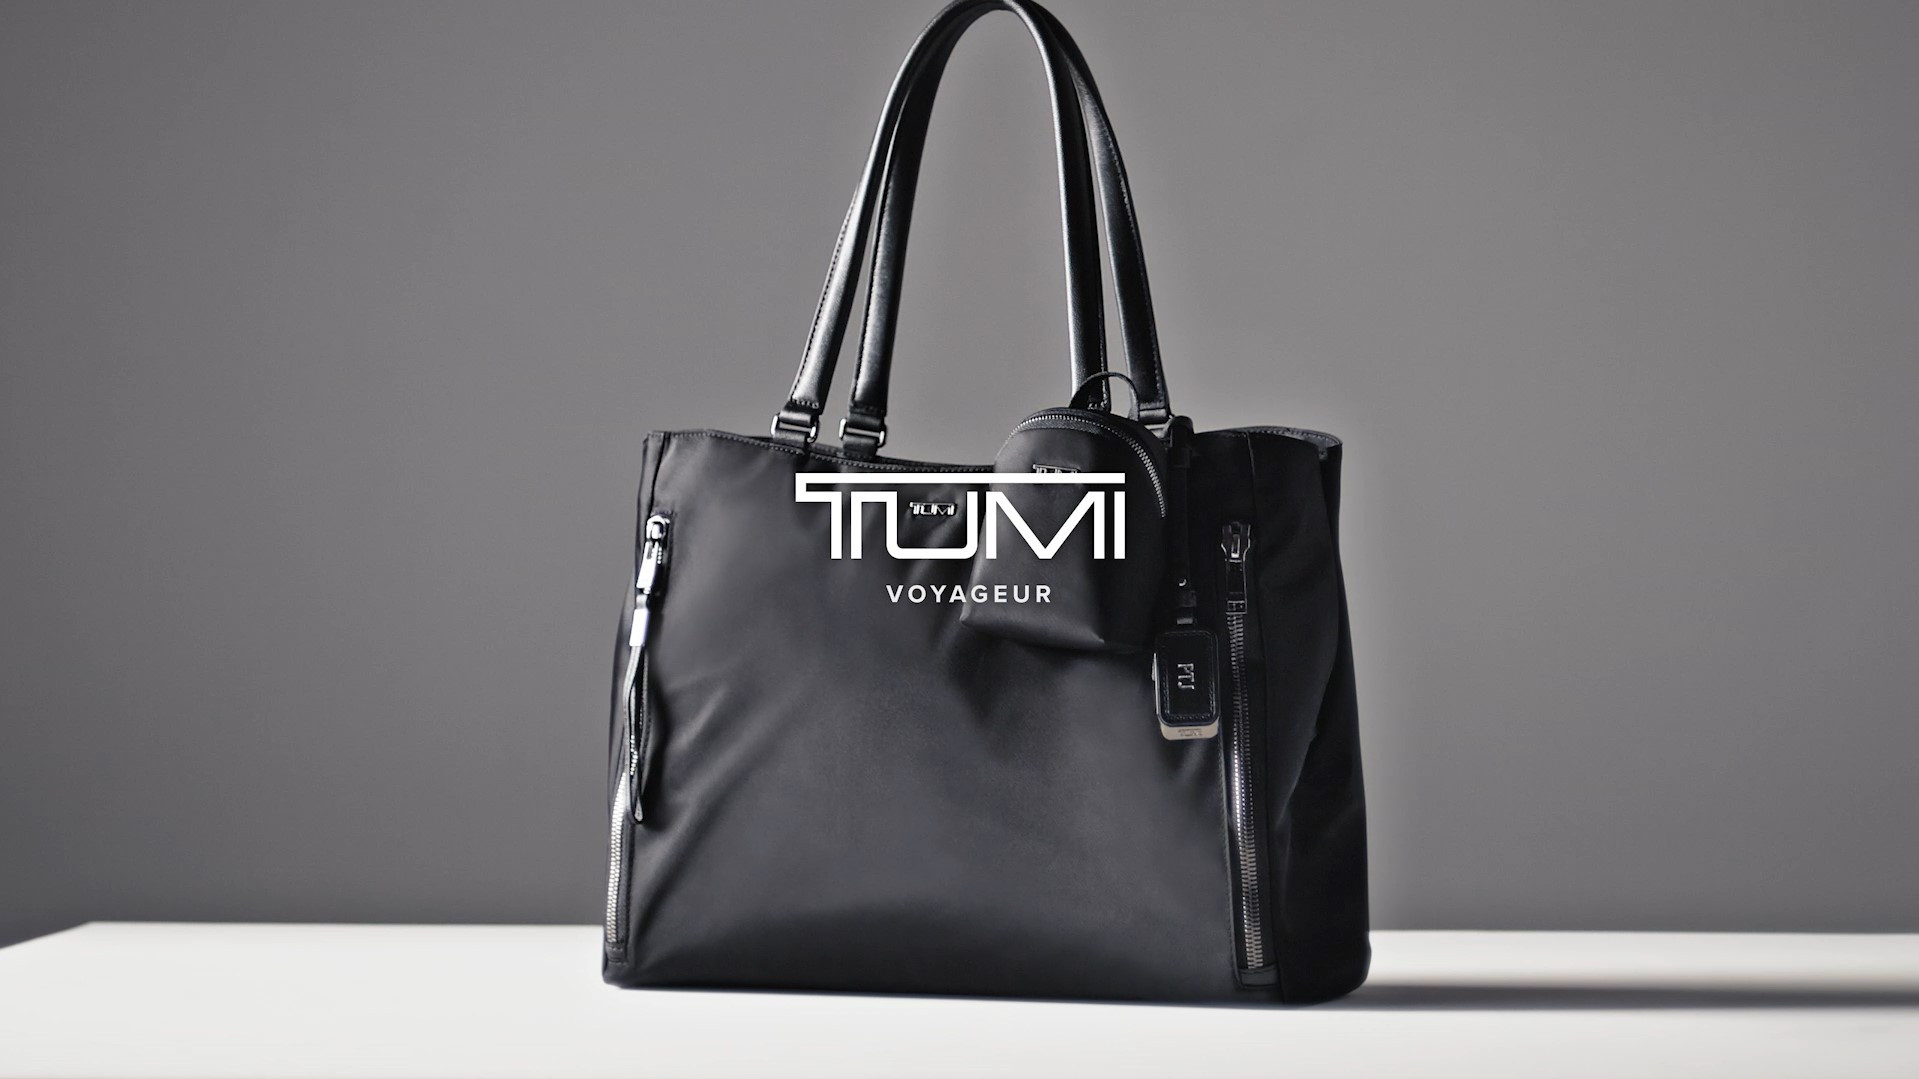 TUMI Voyageur - The Exceptional Everyday Bag